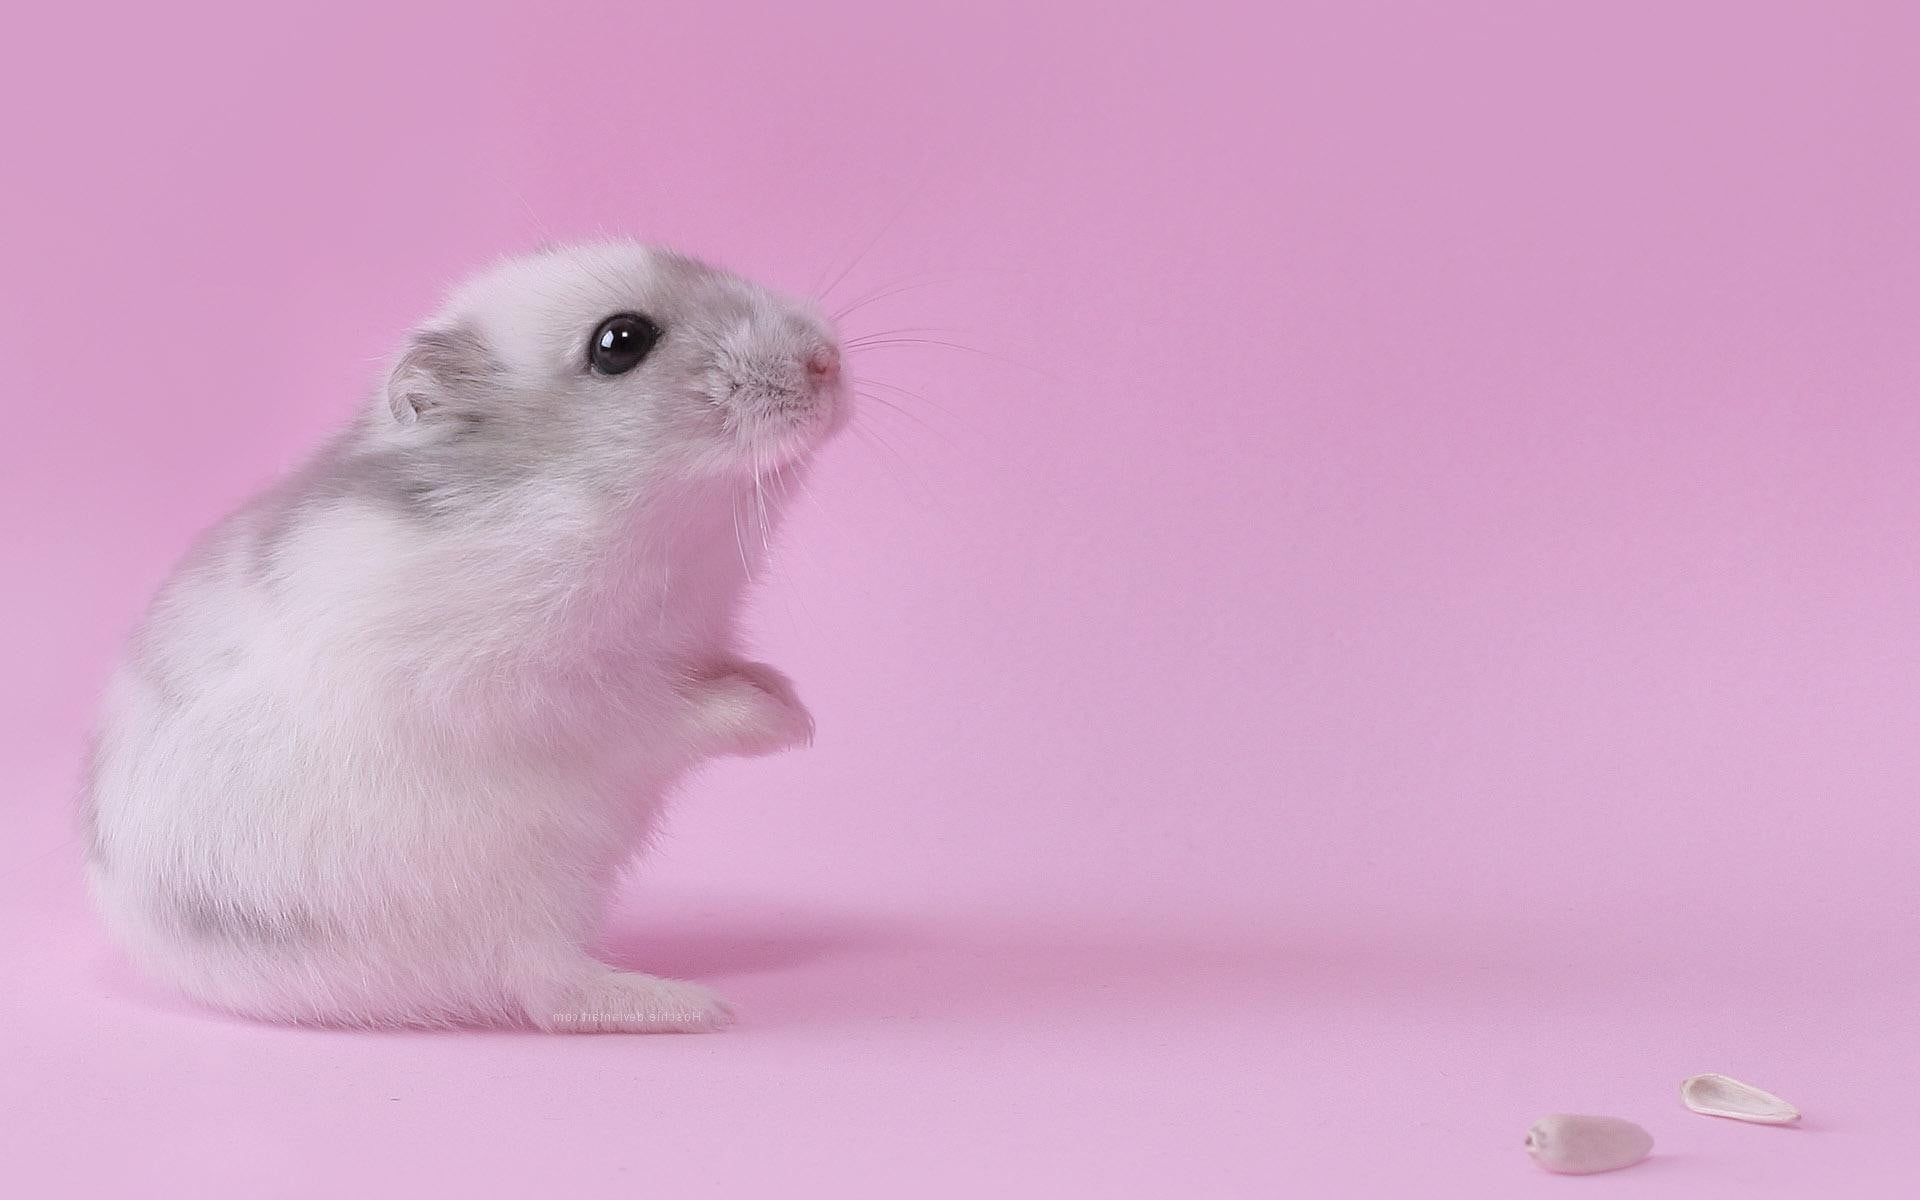 white and grey rodent, pink, animals, pink color, pets, mammal